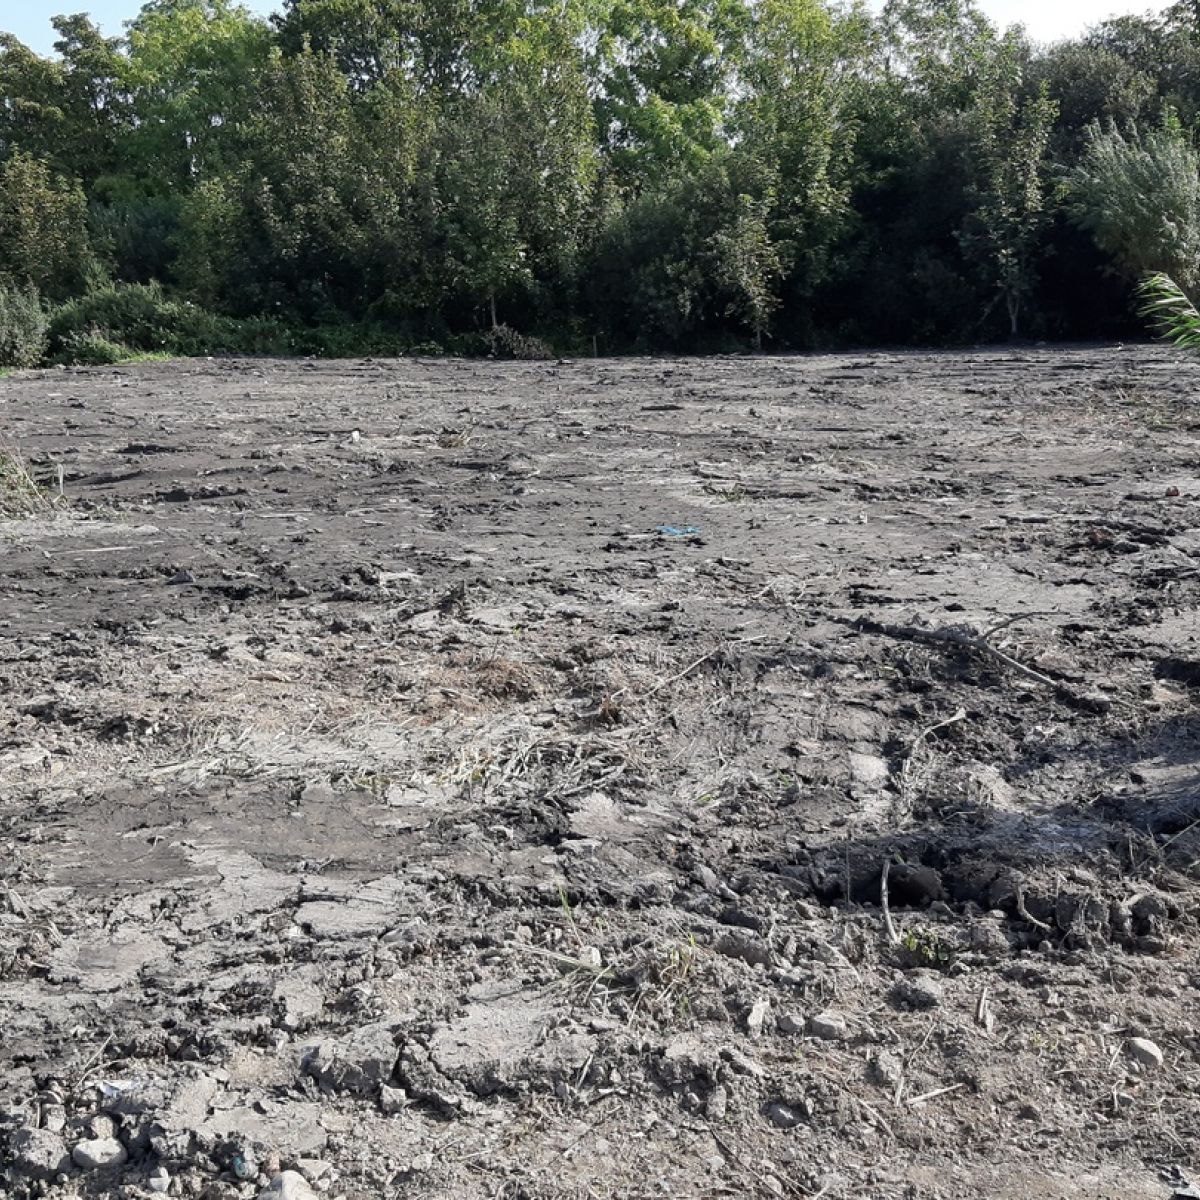 Cyclops vandring Latterlig Ecologists outraged as Dublin nature reserve is 'flattened like a car park'